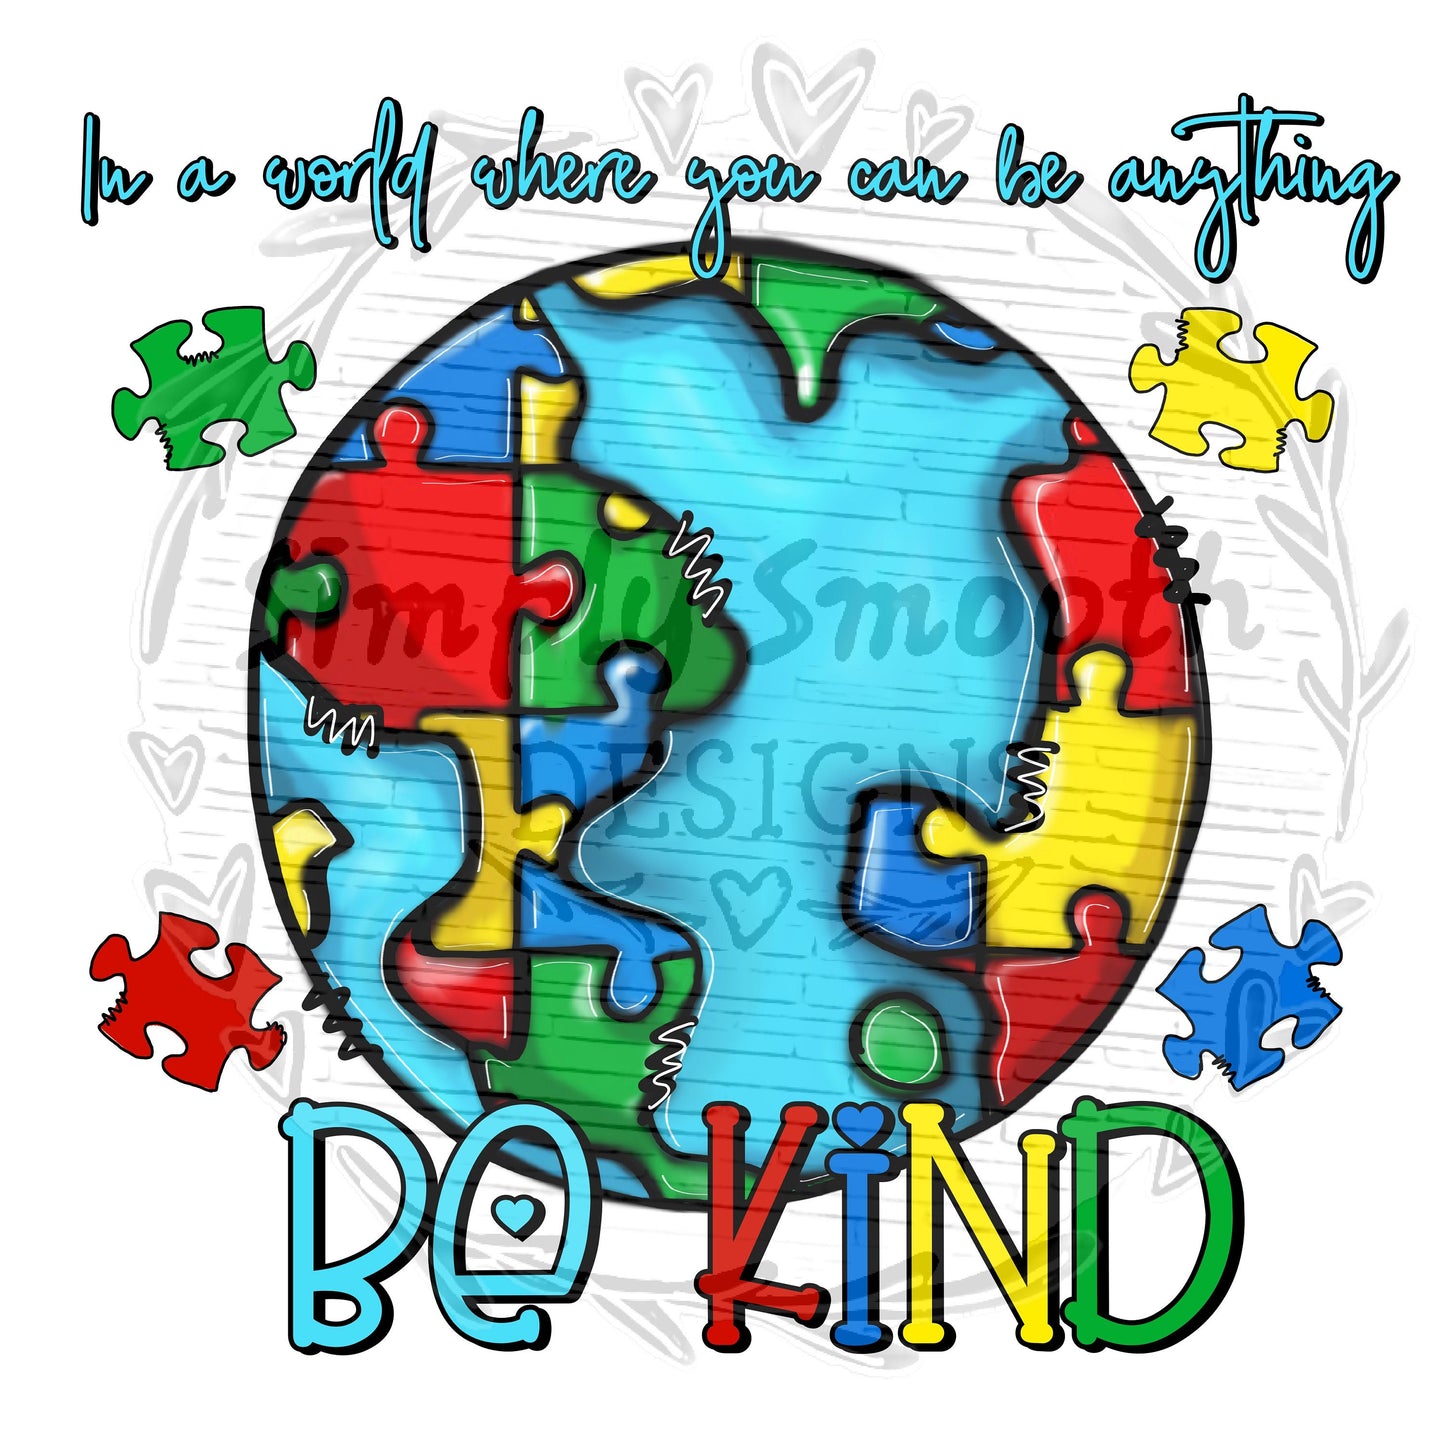 In a world where you can be anything be kind autism awareness